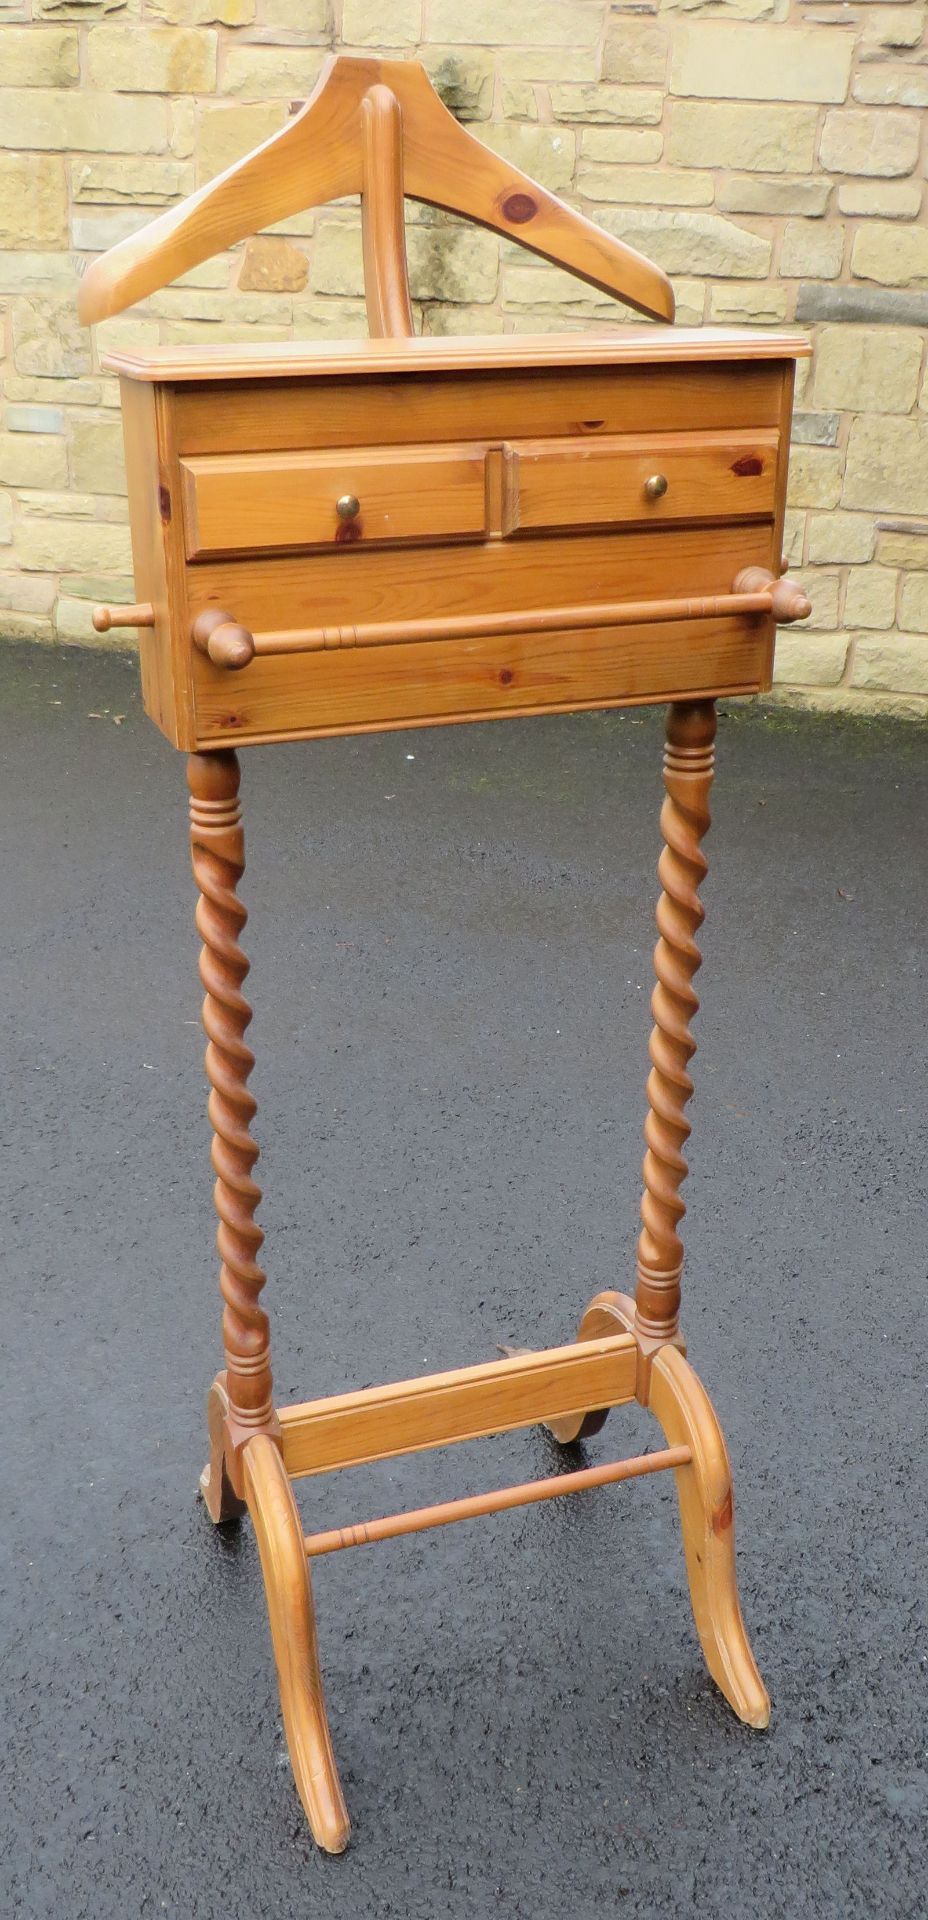 1 x 2-Drawer Pine Mens Valet Stand - CL175 - Location: Altrincham WA14 - NO VAT ON THE HAMMER